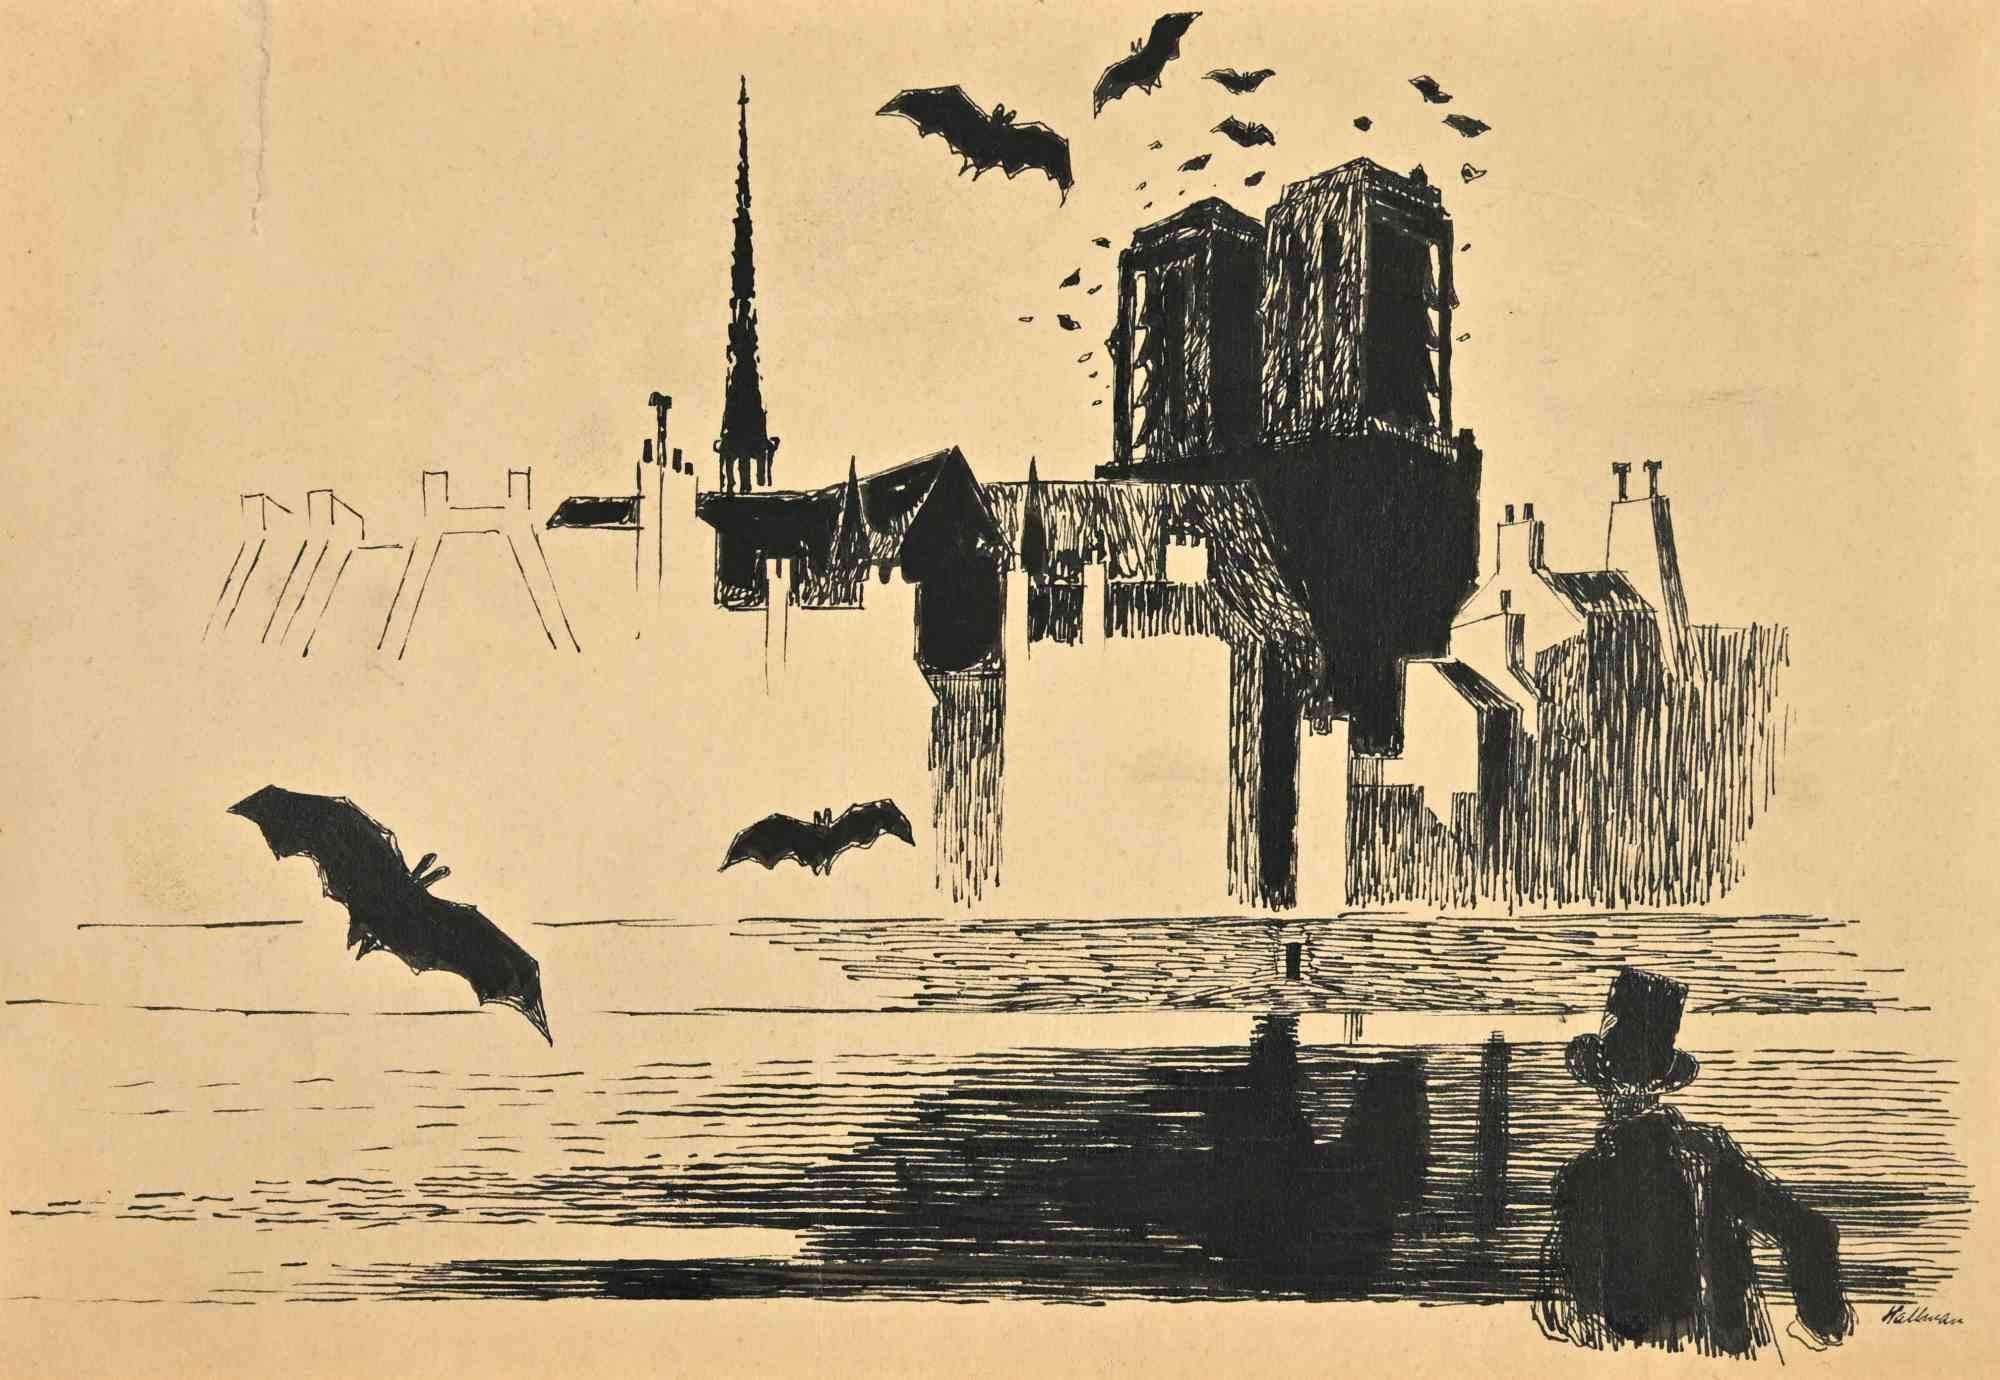 Notre Dame de Paris is a drawing in pen on cream-colored paper, made in the mid-20th Century by the Swedish illustrator and reporter Adolf Reinhold Hallman.

The state of preservation is good.

Adolf Hallman  (1893 – 1968) was a Swedish illustrator